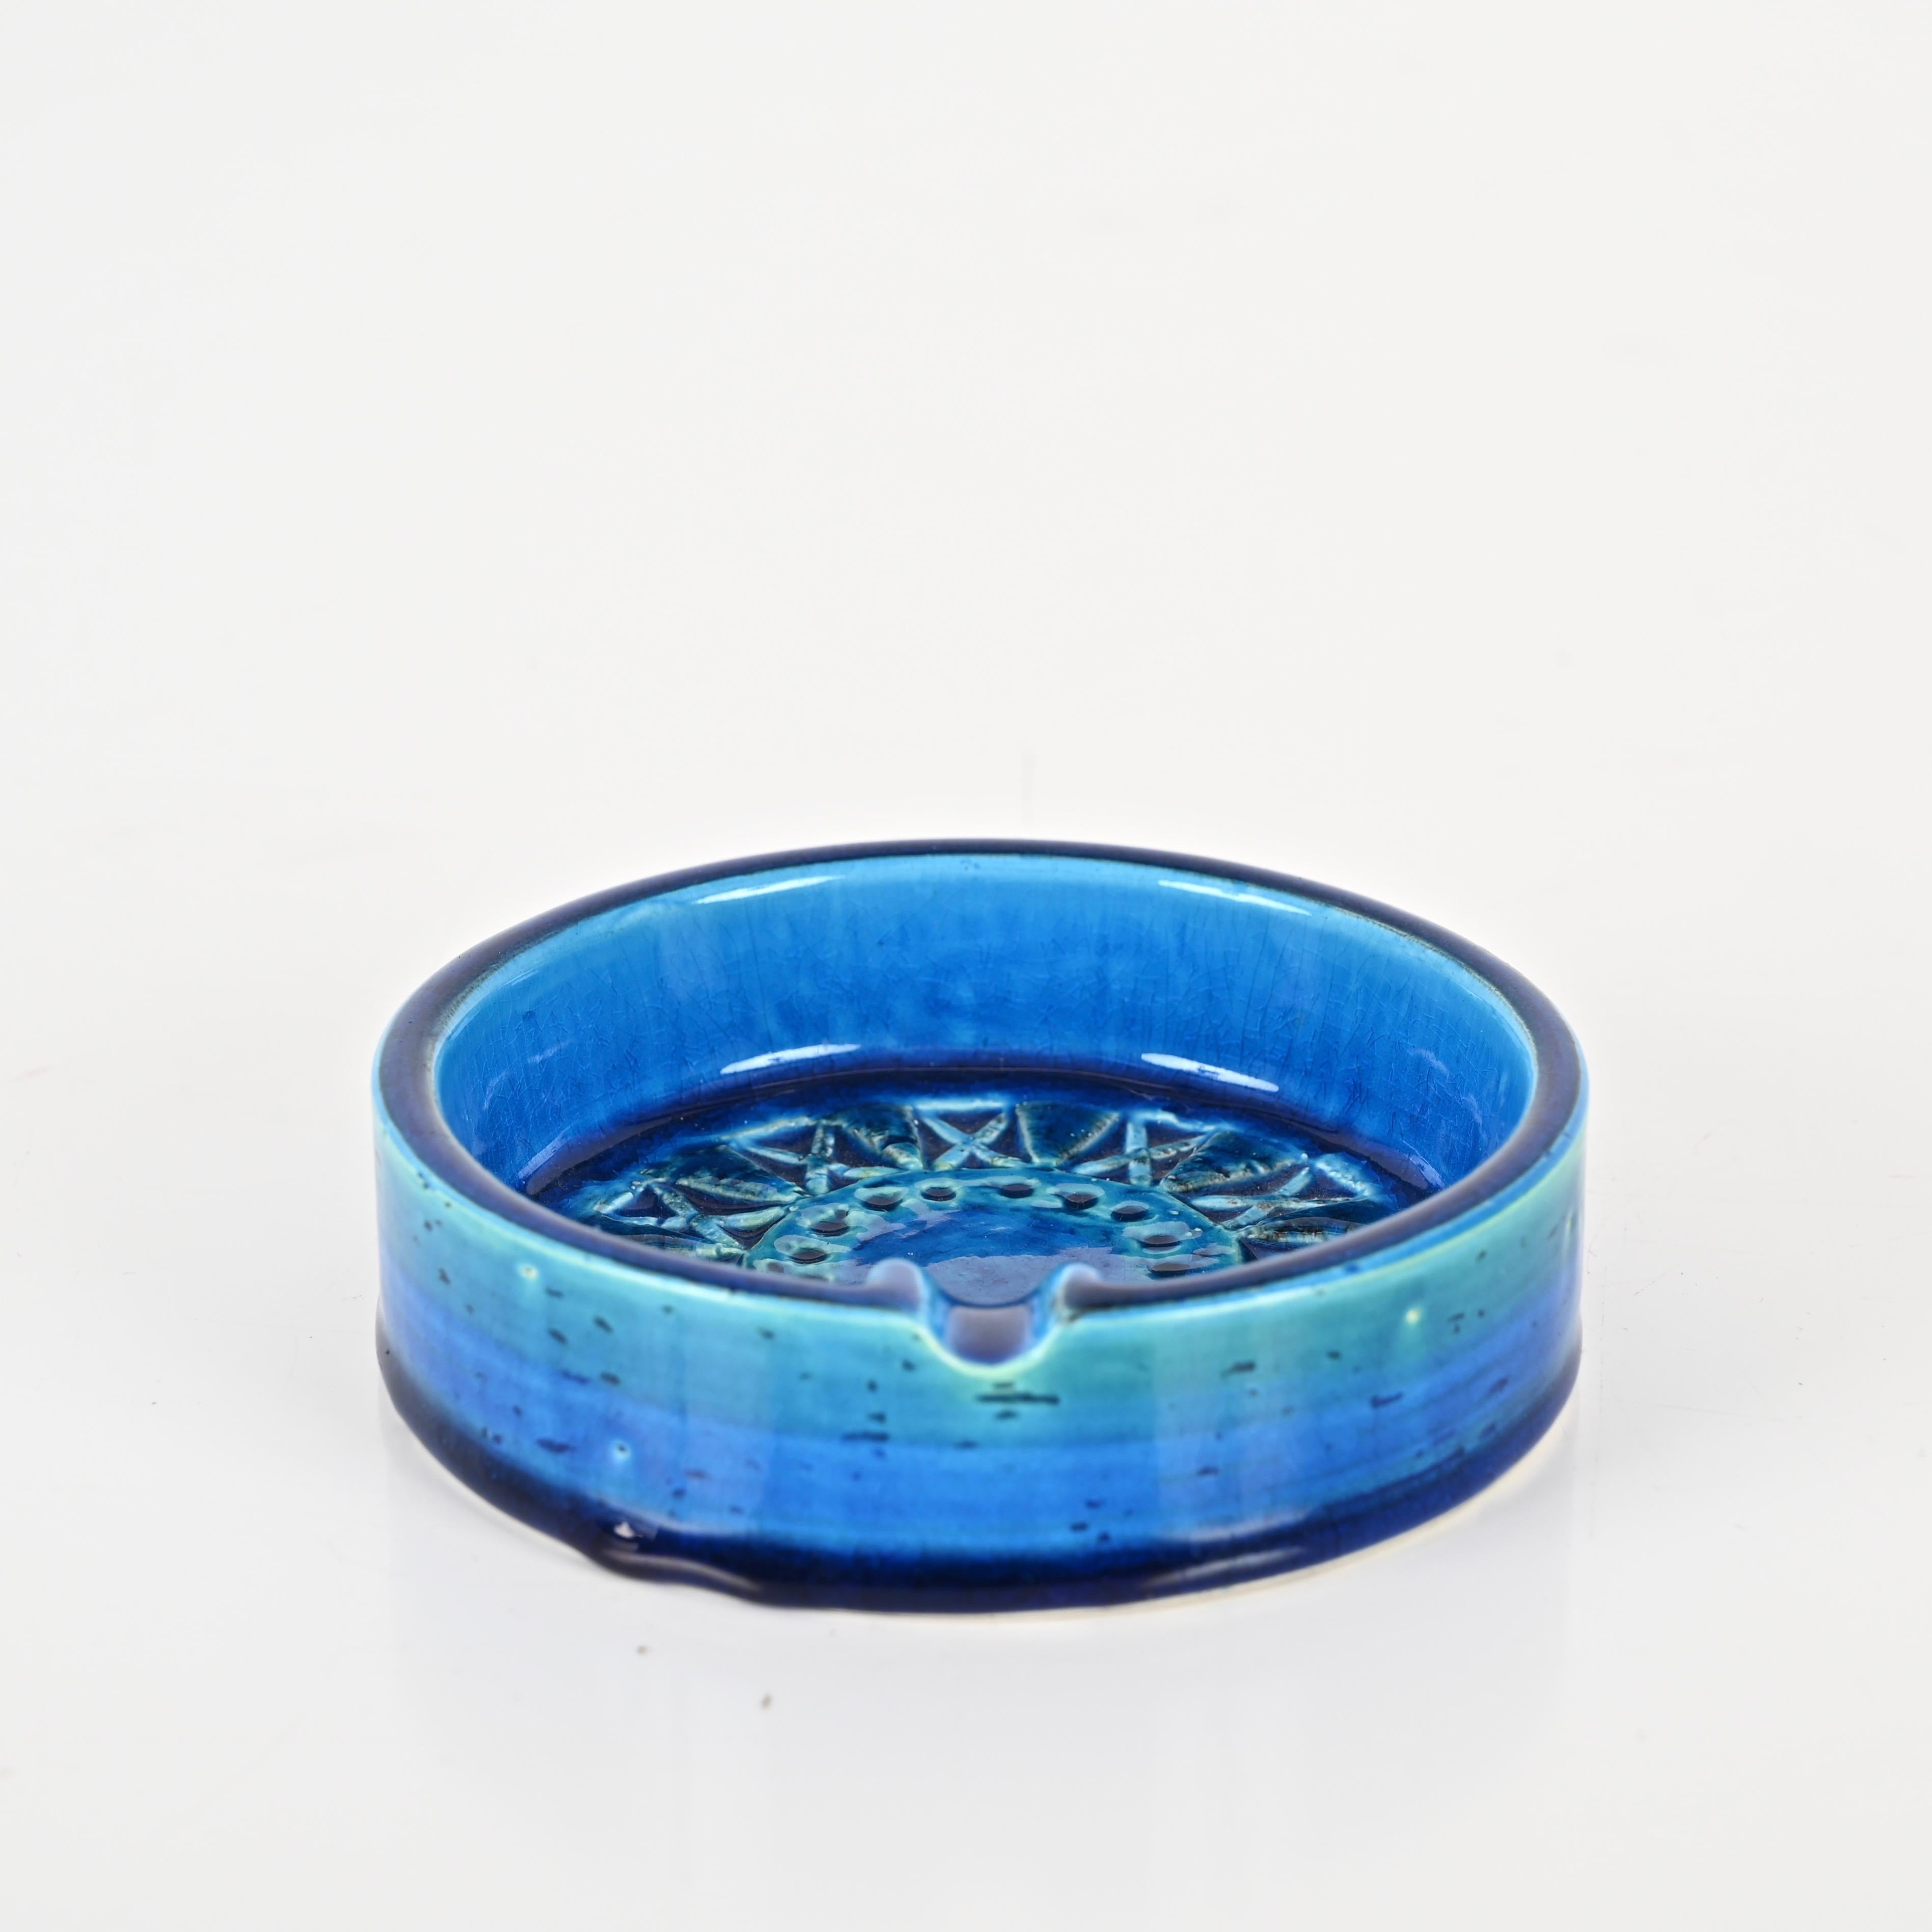 Midcentury Ashtray by Montelupo in Blue 